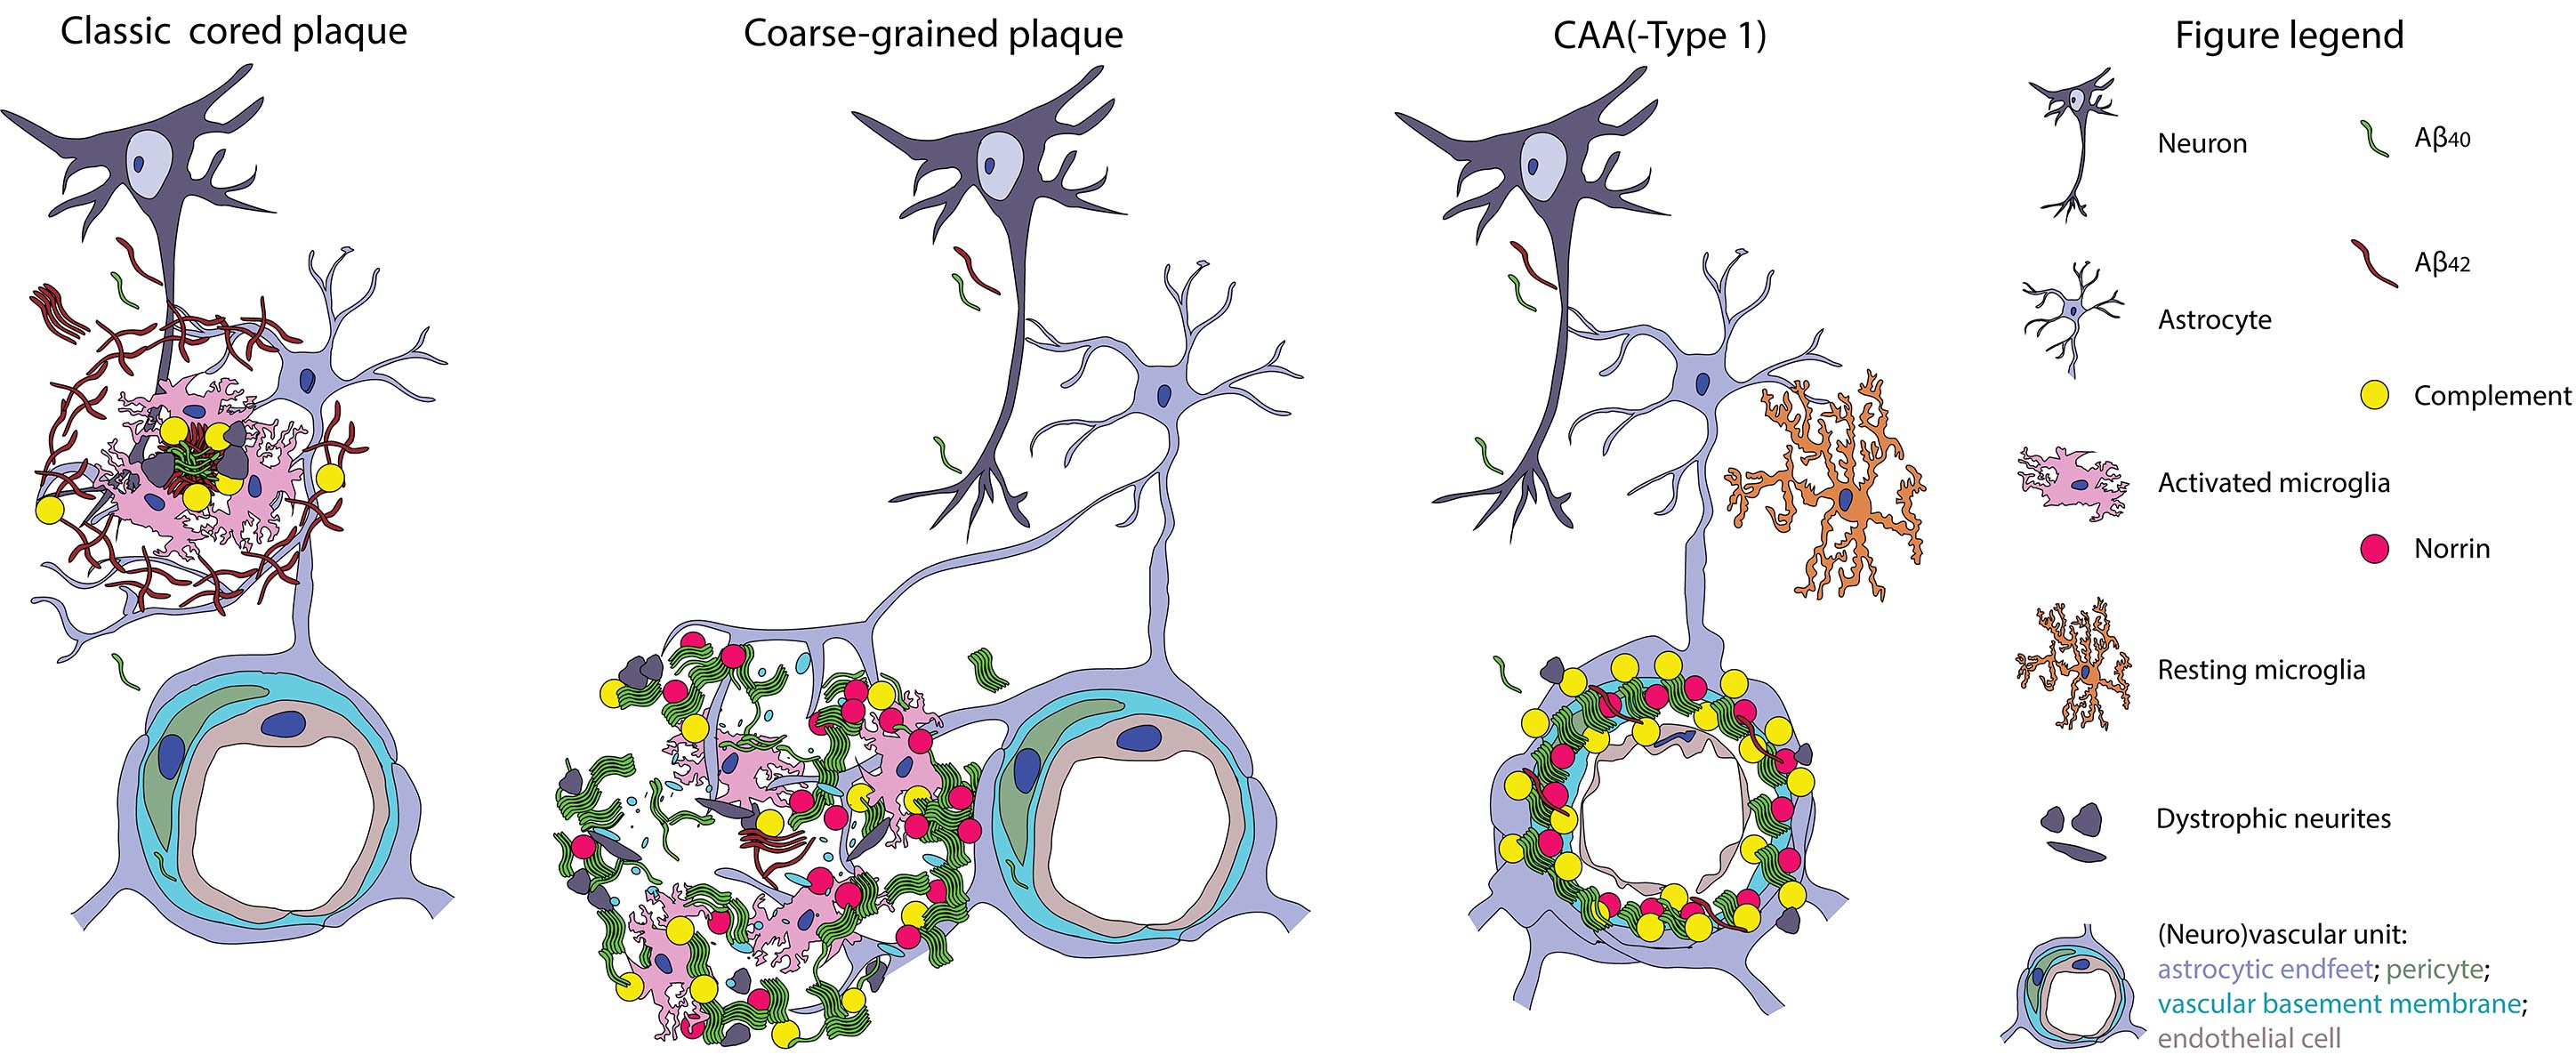 Illustration of the coarse-grained plaques at the blood-brain barrier